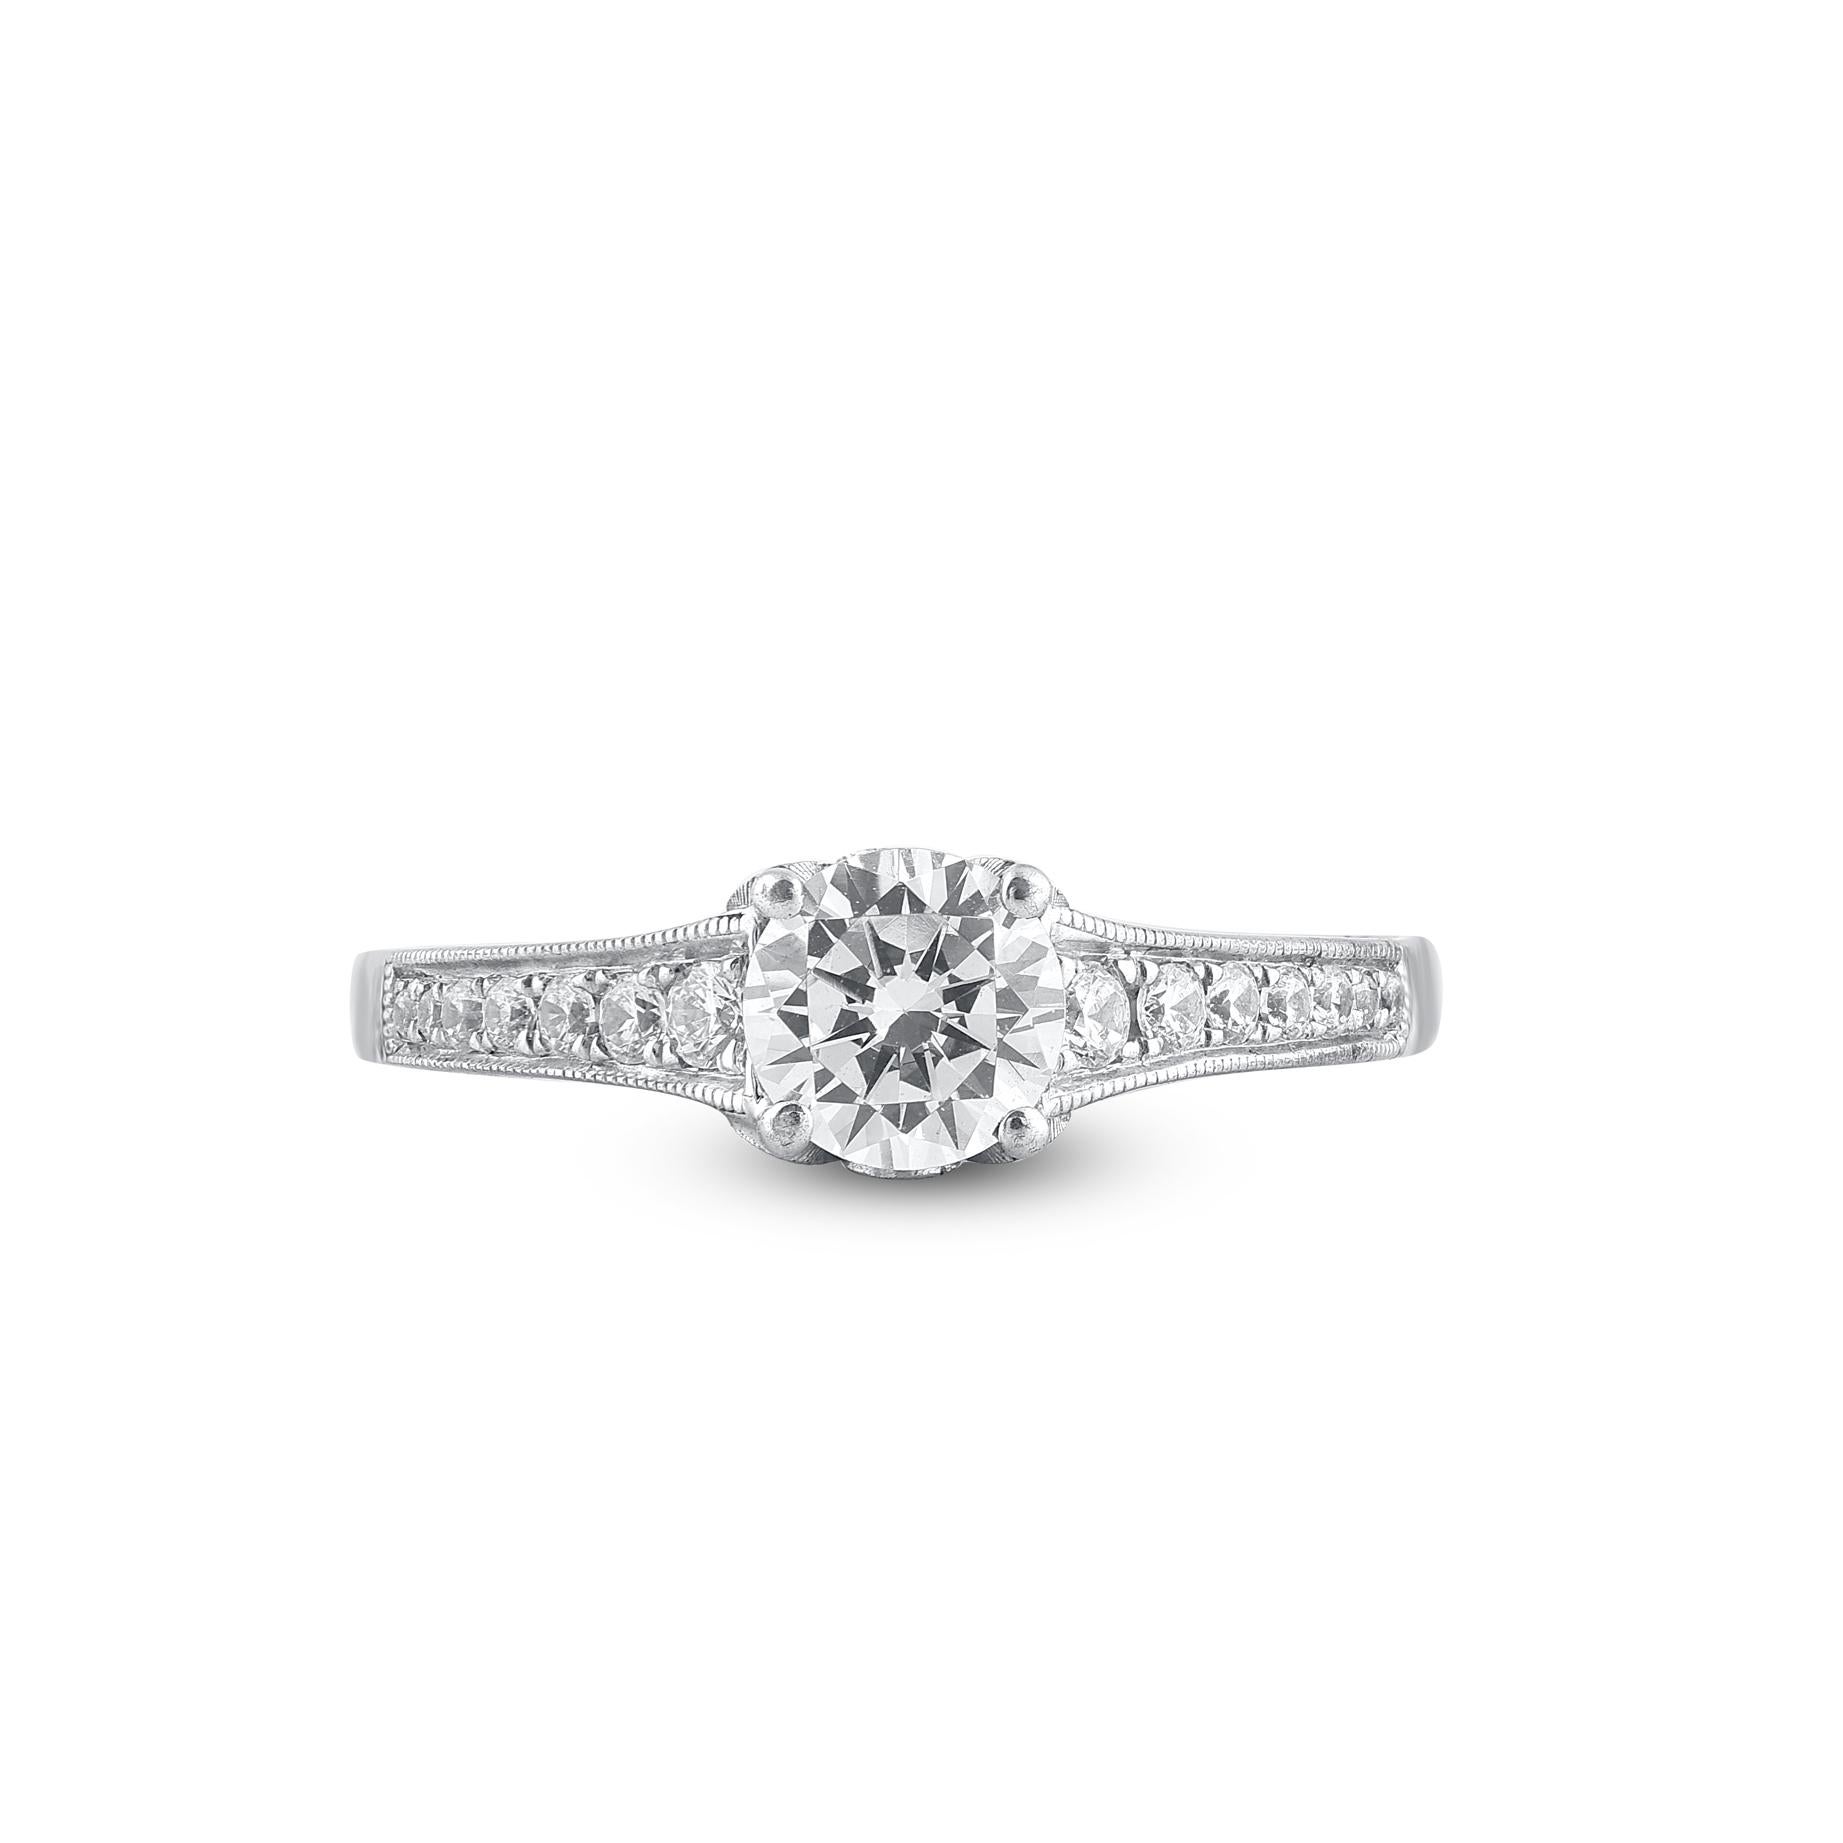 Win her heart with this classic and elegant diamond wedding ring. These diamond ring are studded with 29 single cut and brilliant cut round diamonds in prong and bezel setting and crafted in 14kt white gold. The white diamonds are graded as H-I